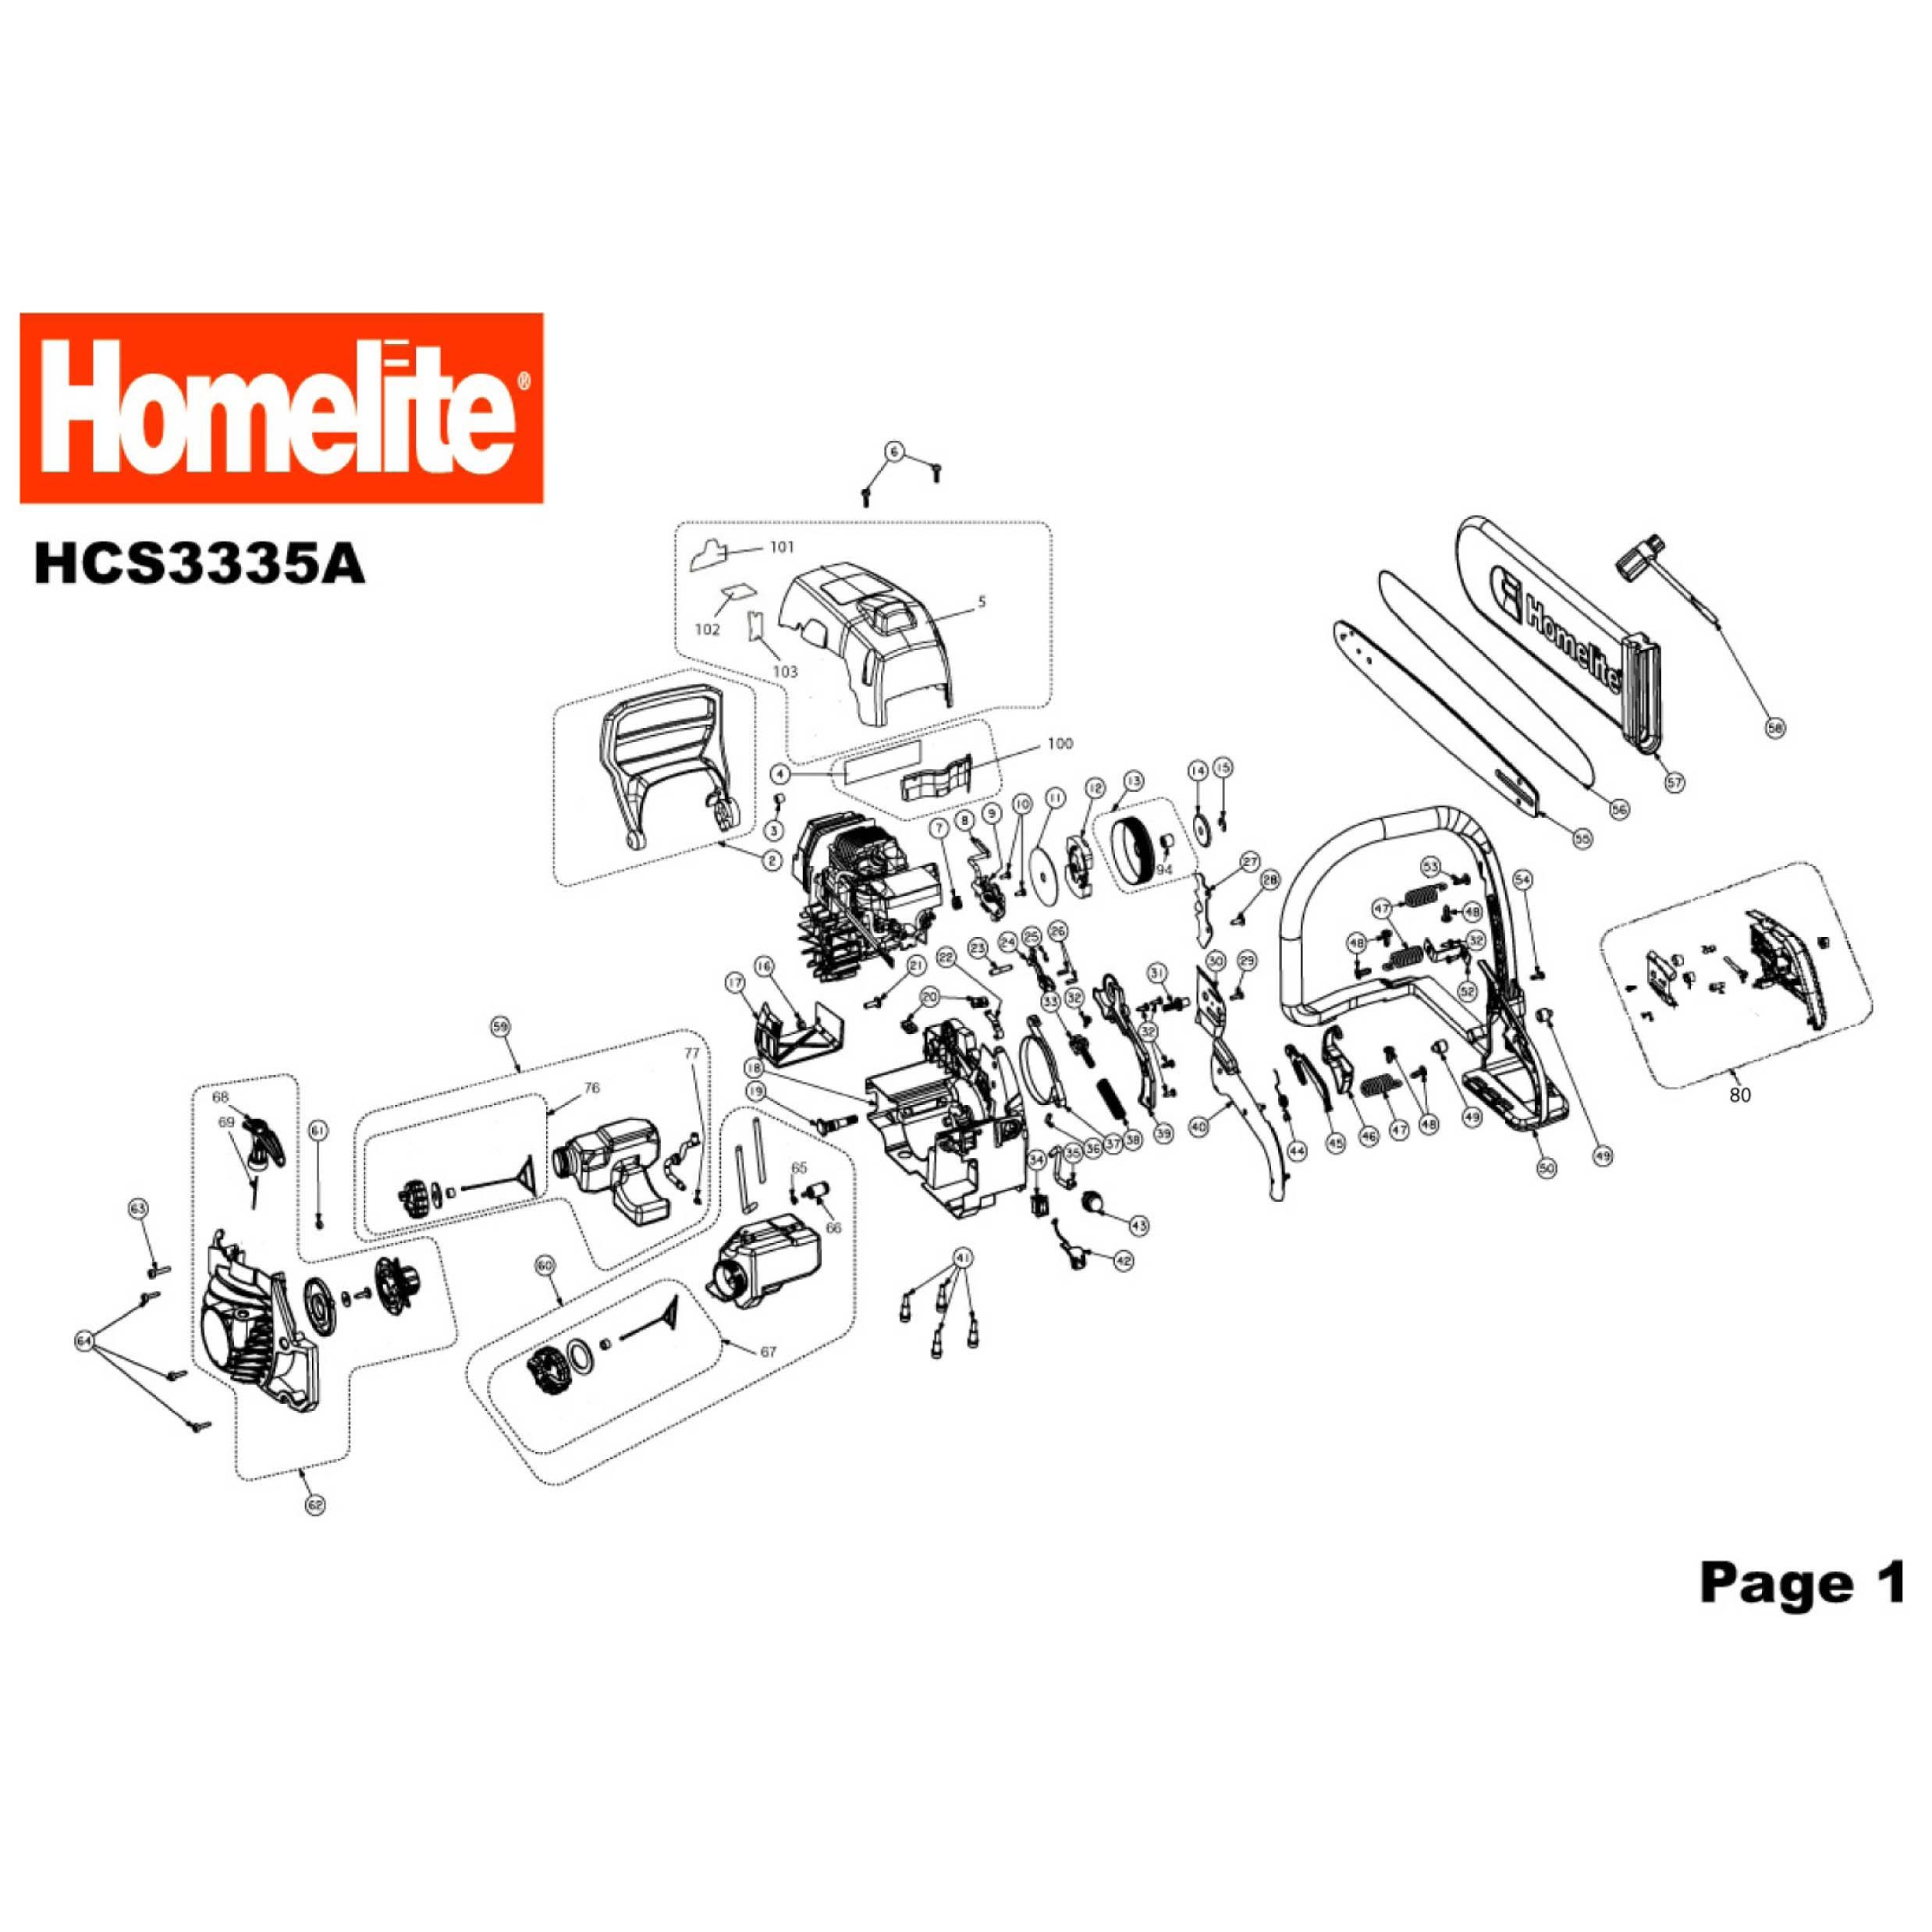 Homelite Chainsaw Wiring Diagram Homelite Hcs3335a Exploded Diagram Of Chainsaw with Components